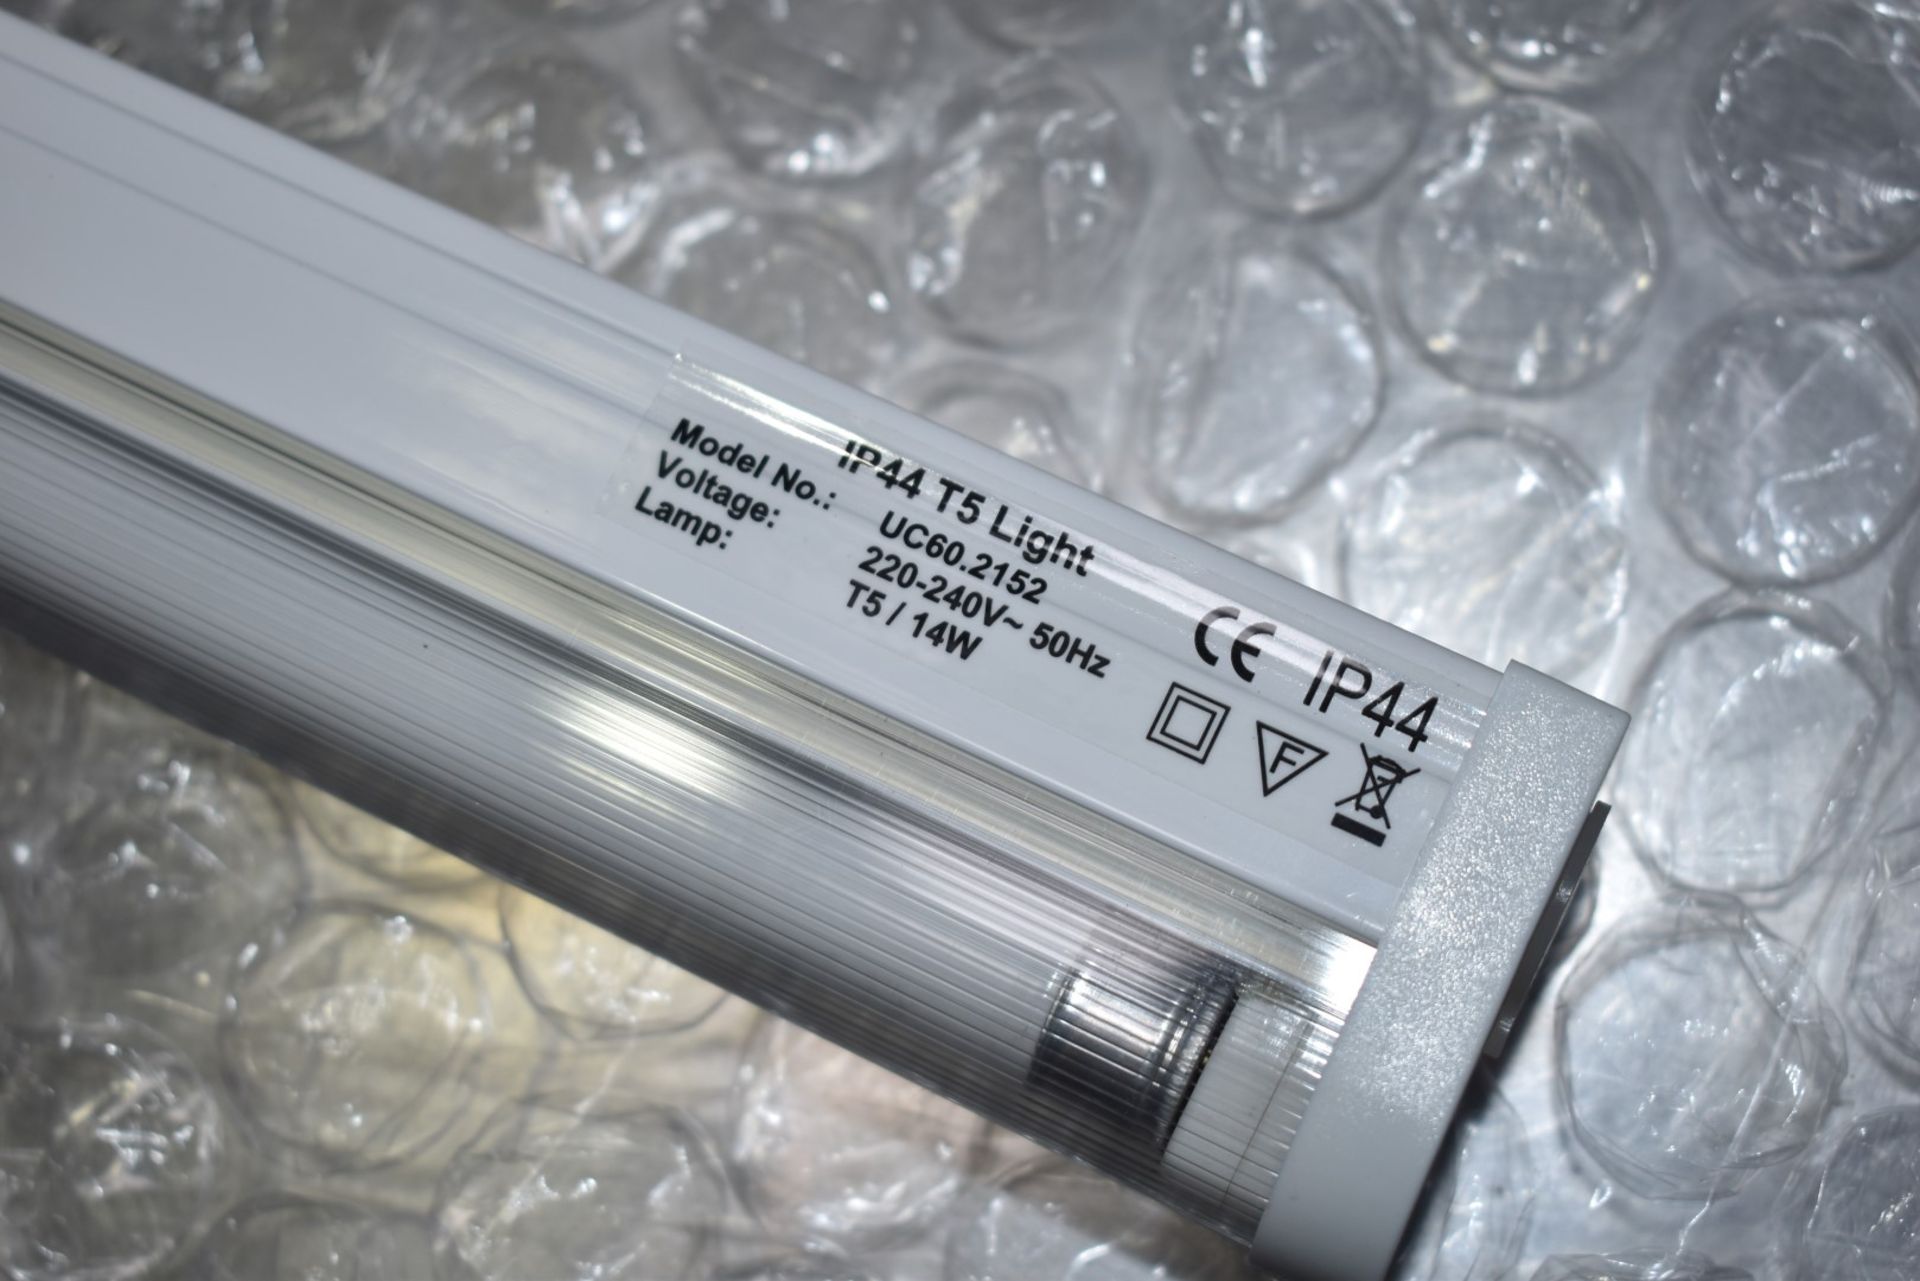 1 x Bathroom Light Fitting - IP44 Waterproof T5 14w Fluorescent Lights With Built-In Electronic - Image 6 of 11